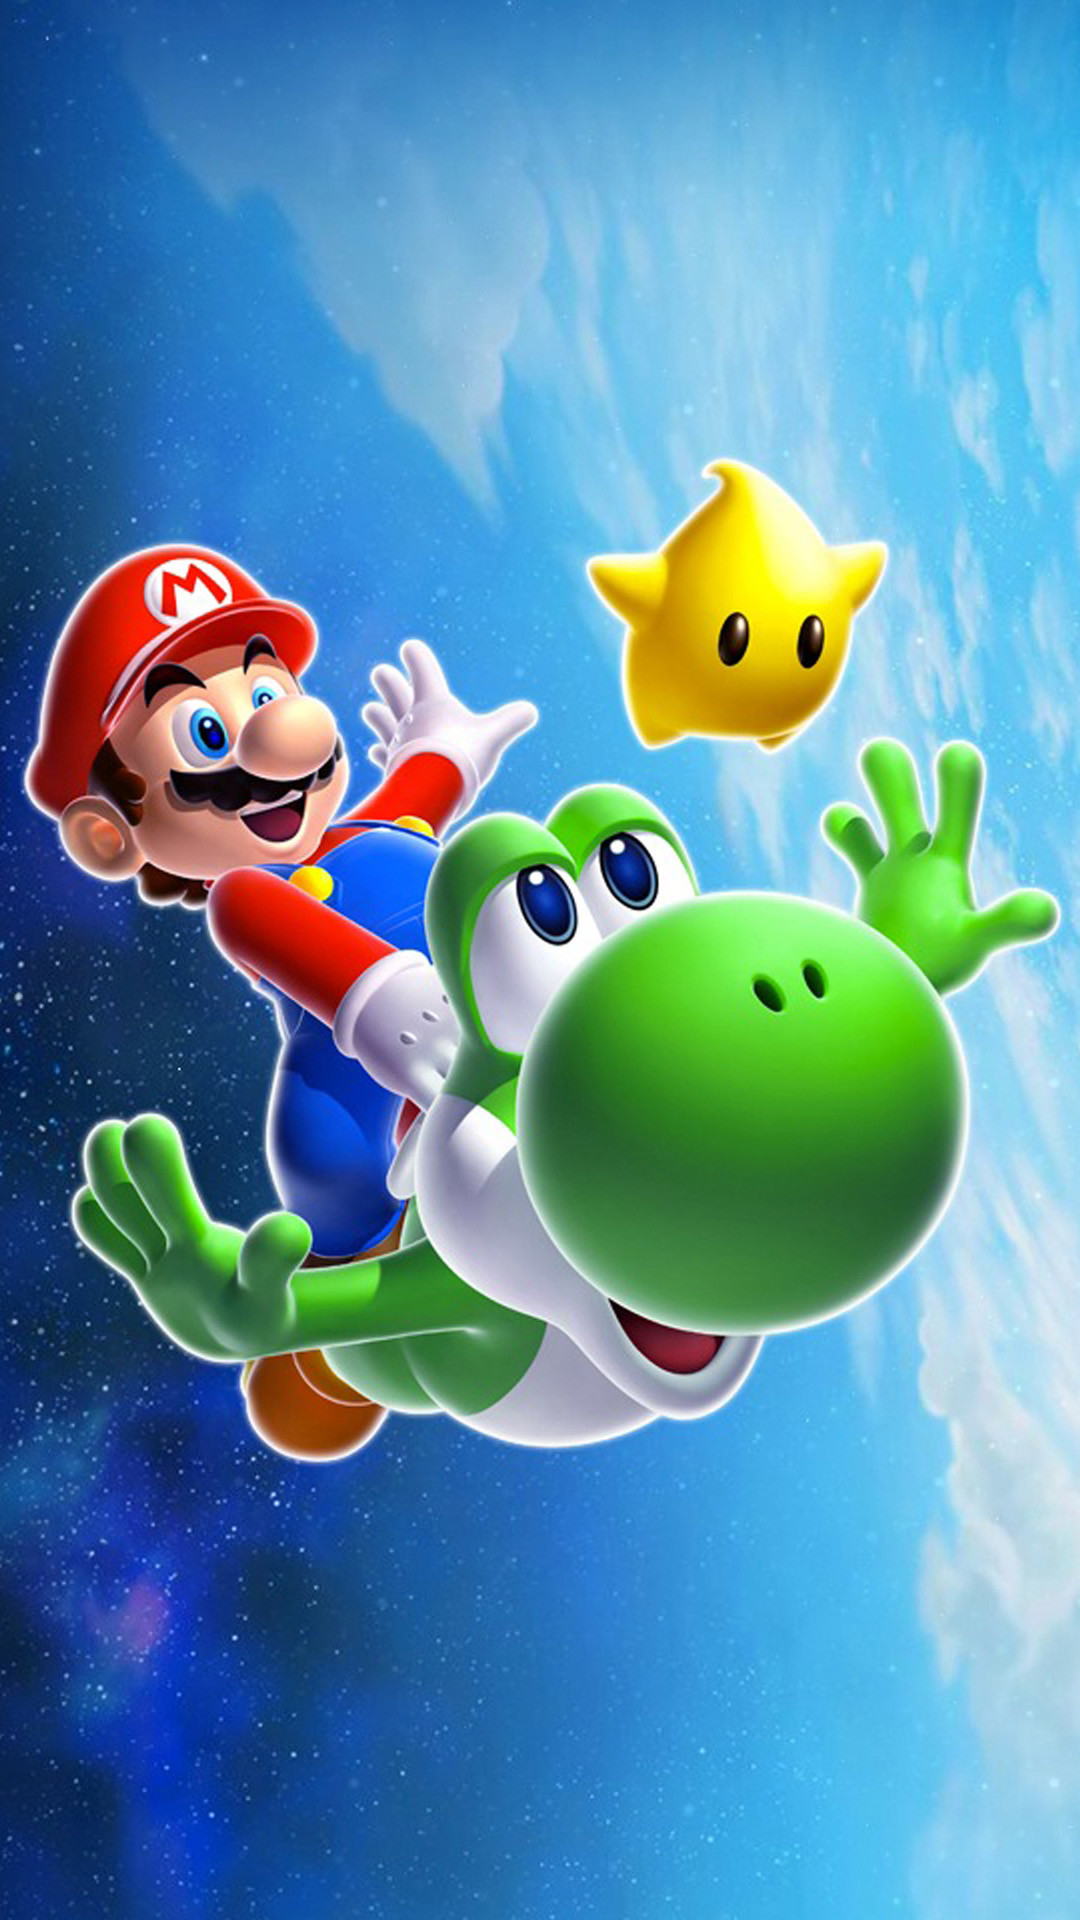 1080x1920 hd super mario bros world mobile phone wallpapers 